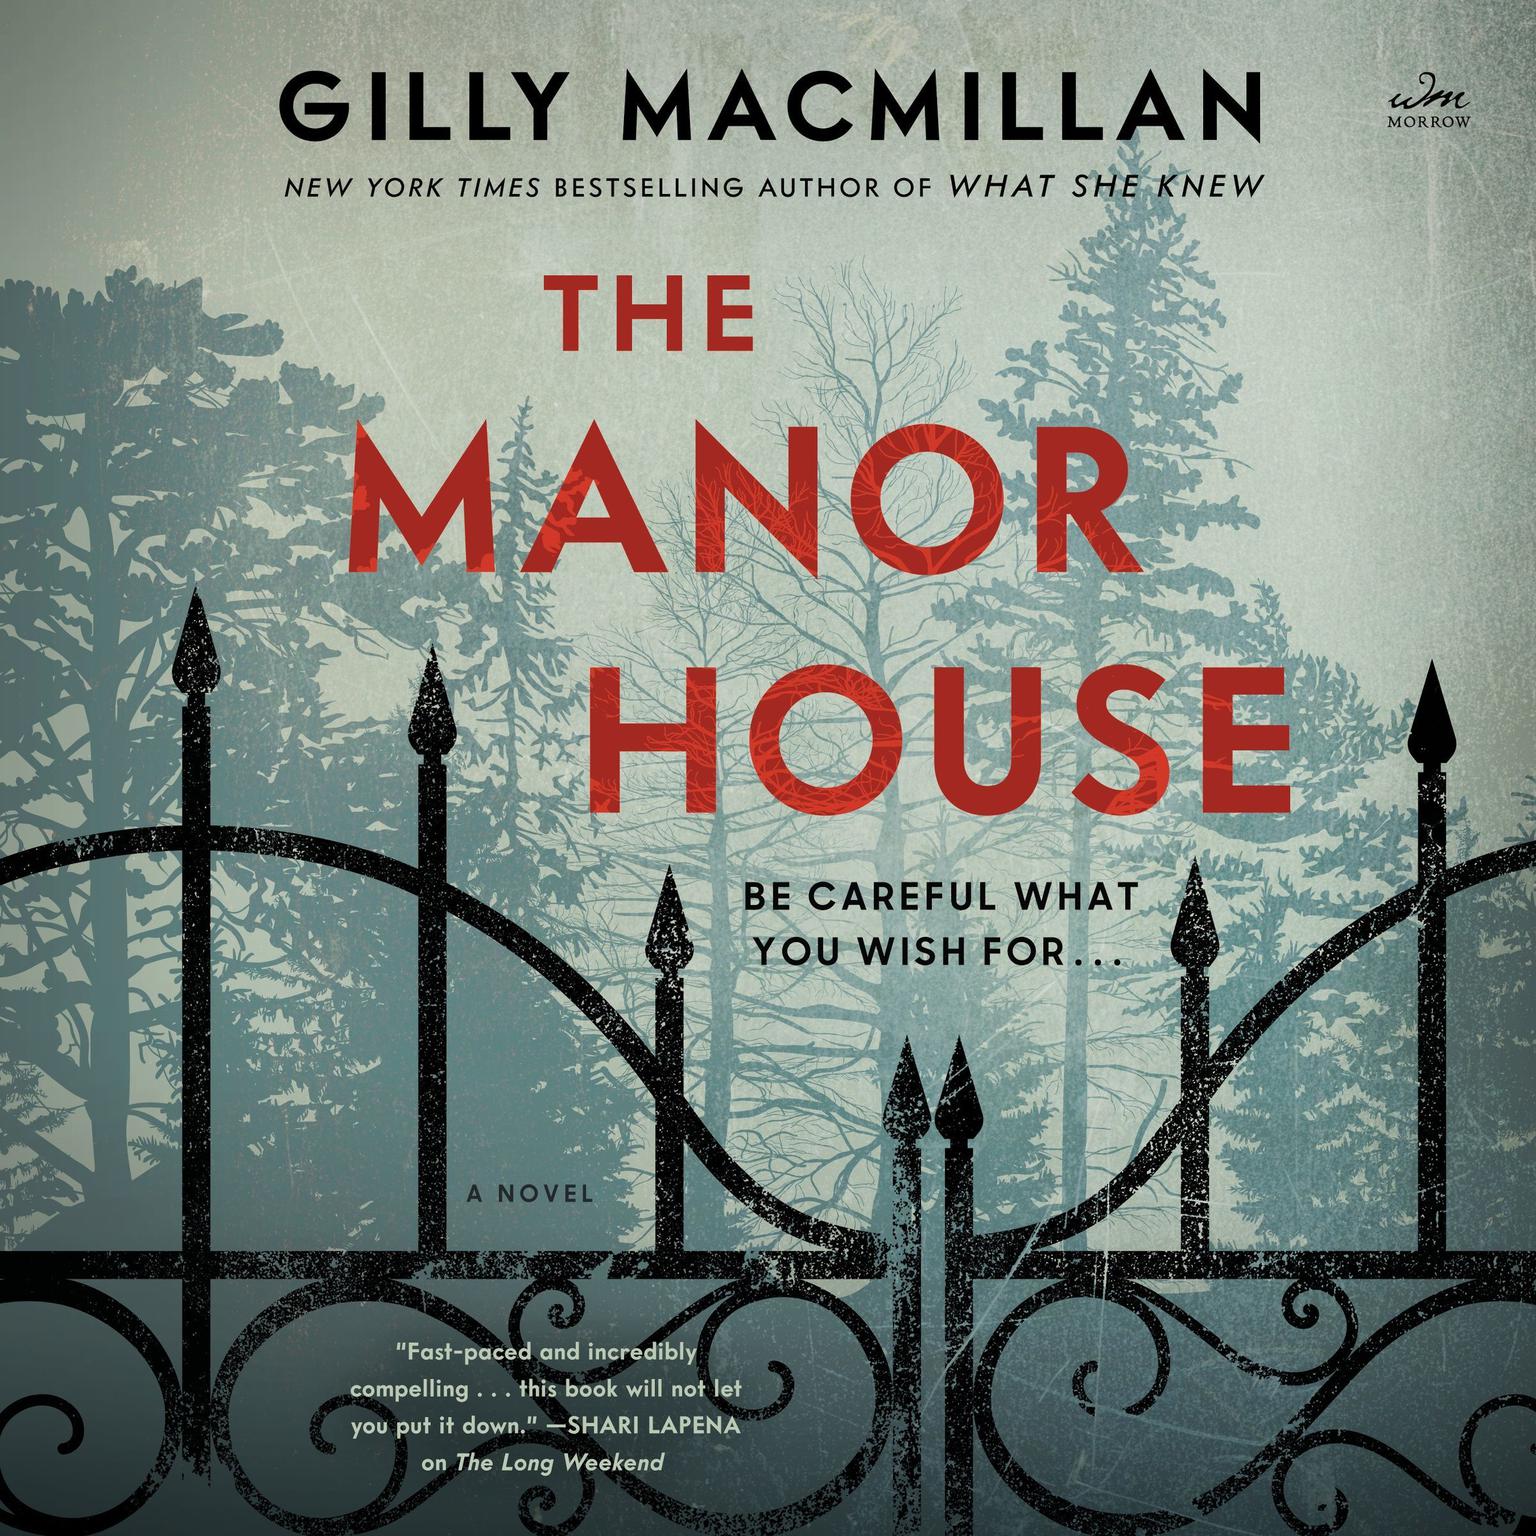 The Manor House: A Novel Audiobook, by Gilly Macmillan